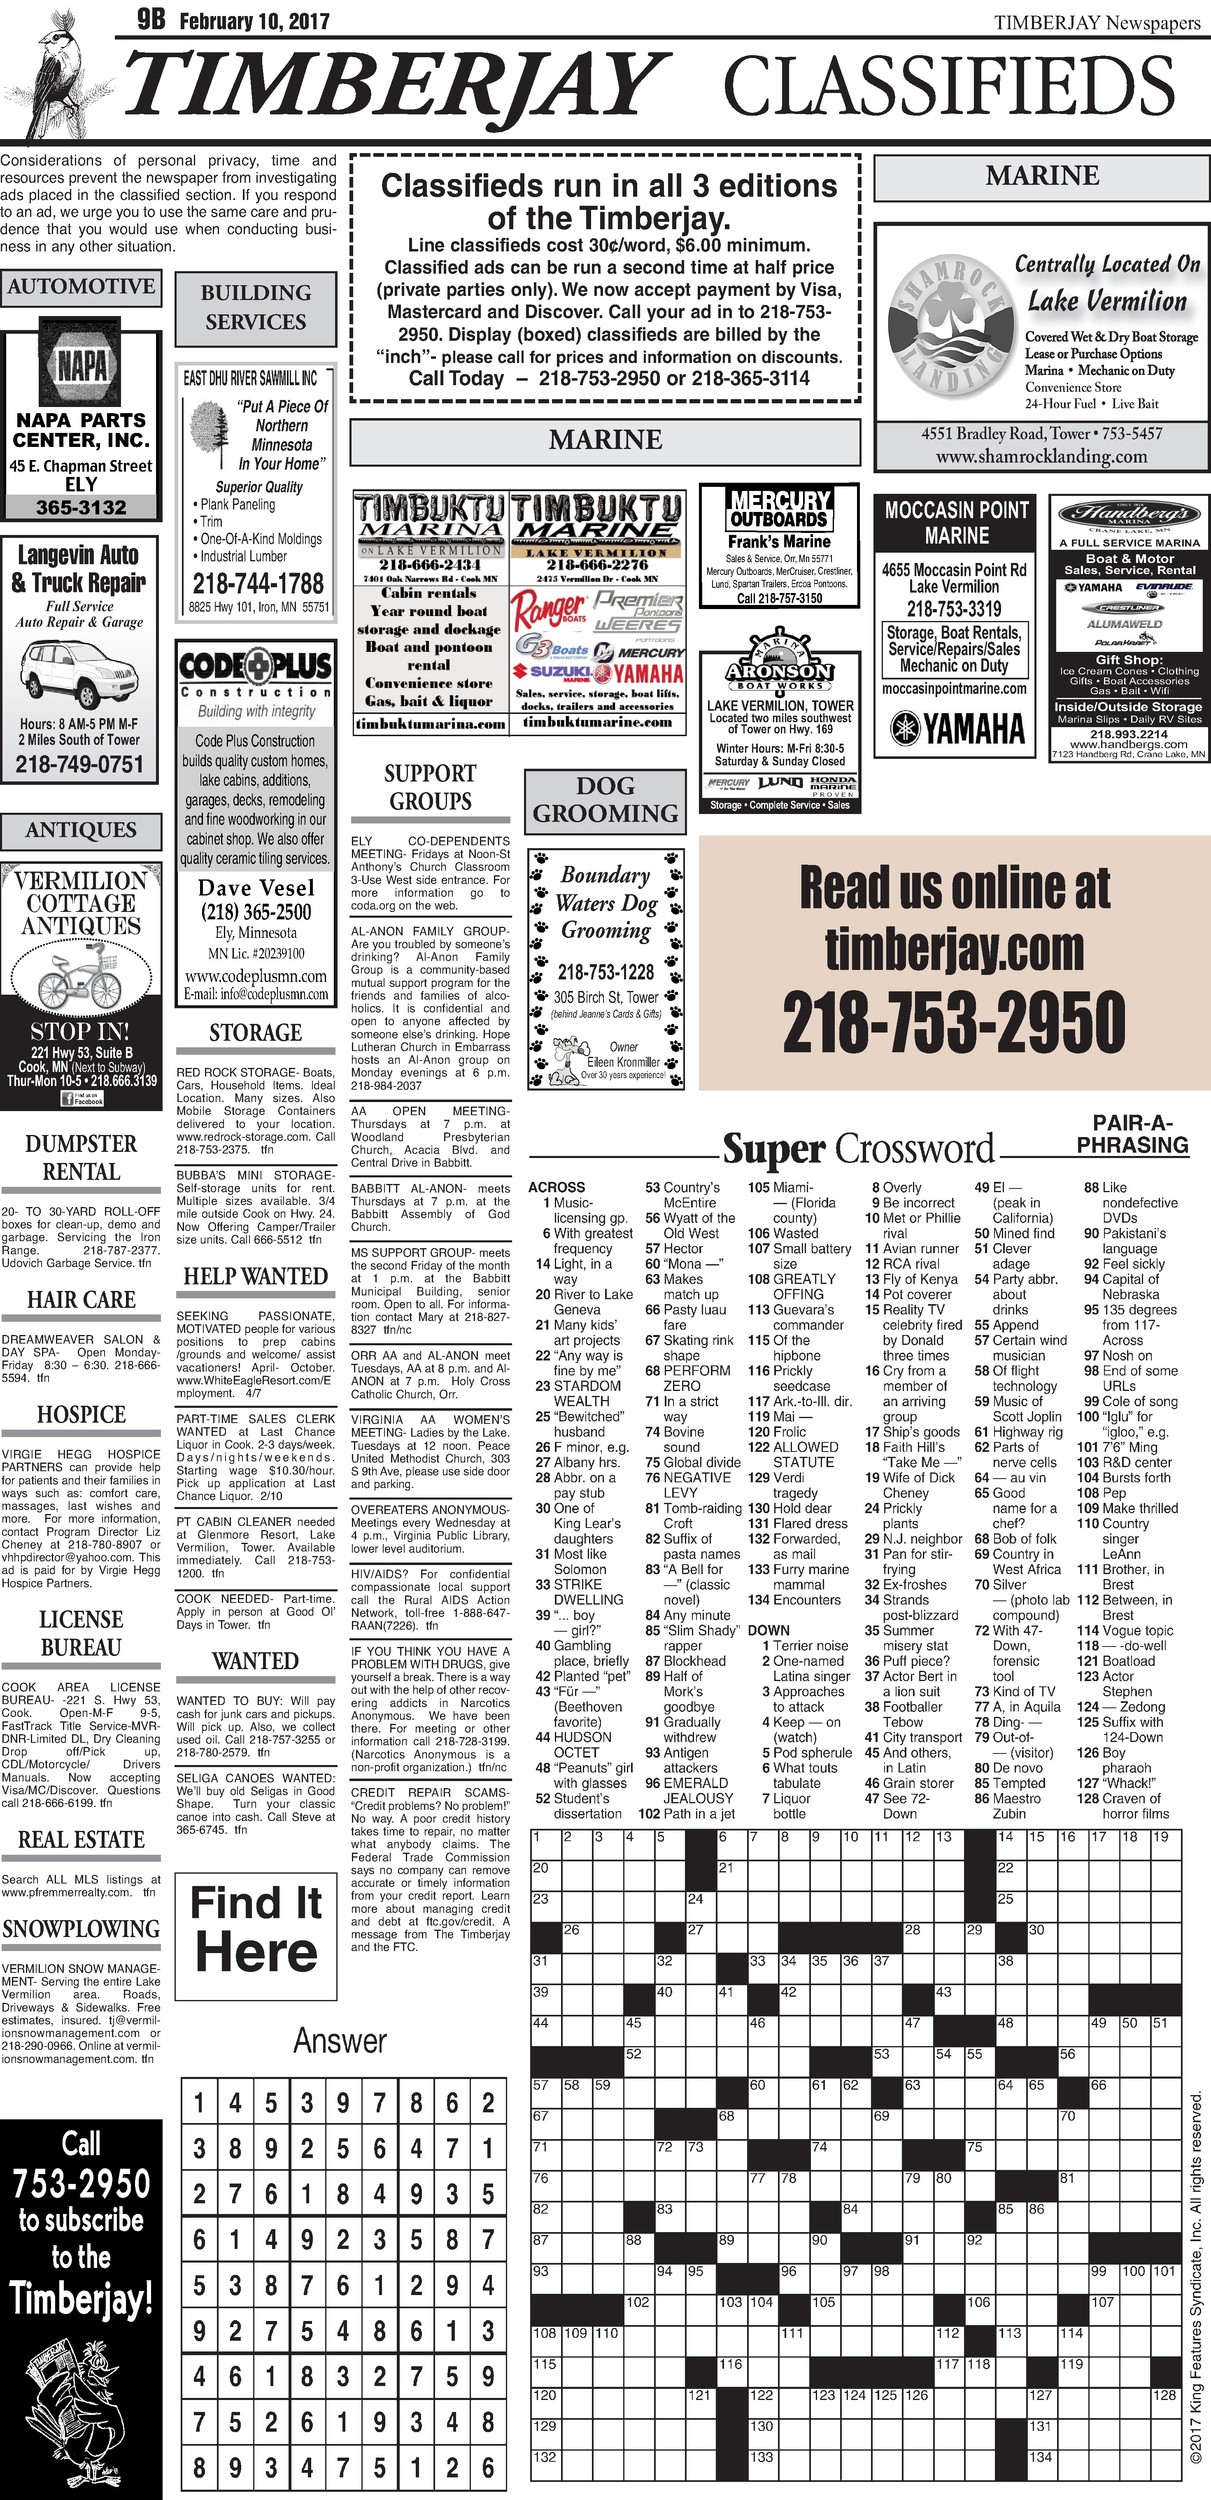 Click here for the legal notices and classifieds on page B9